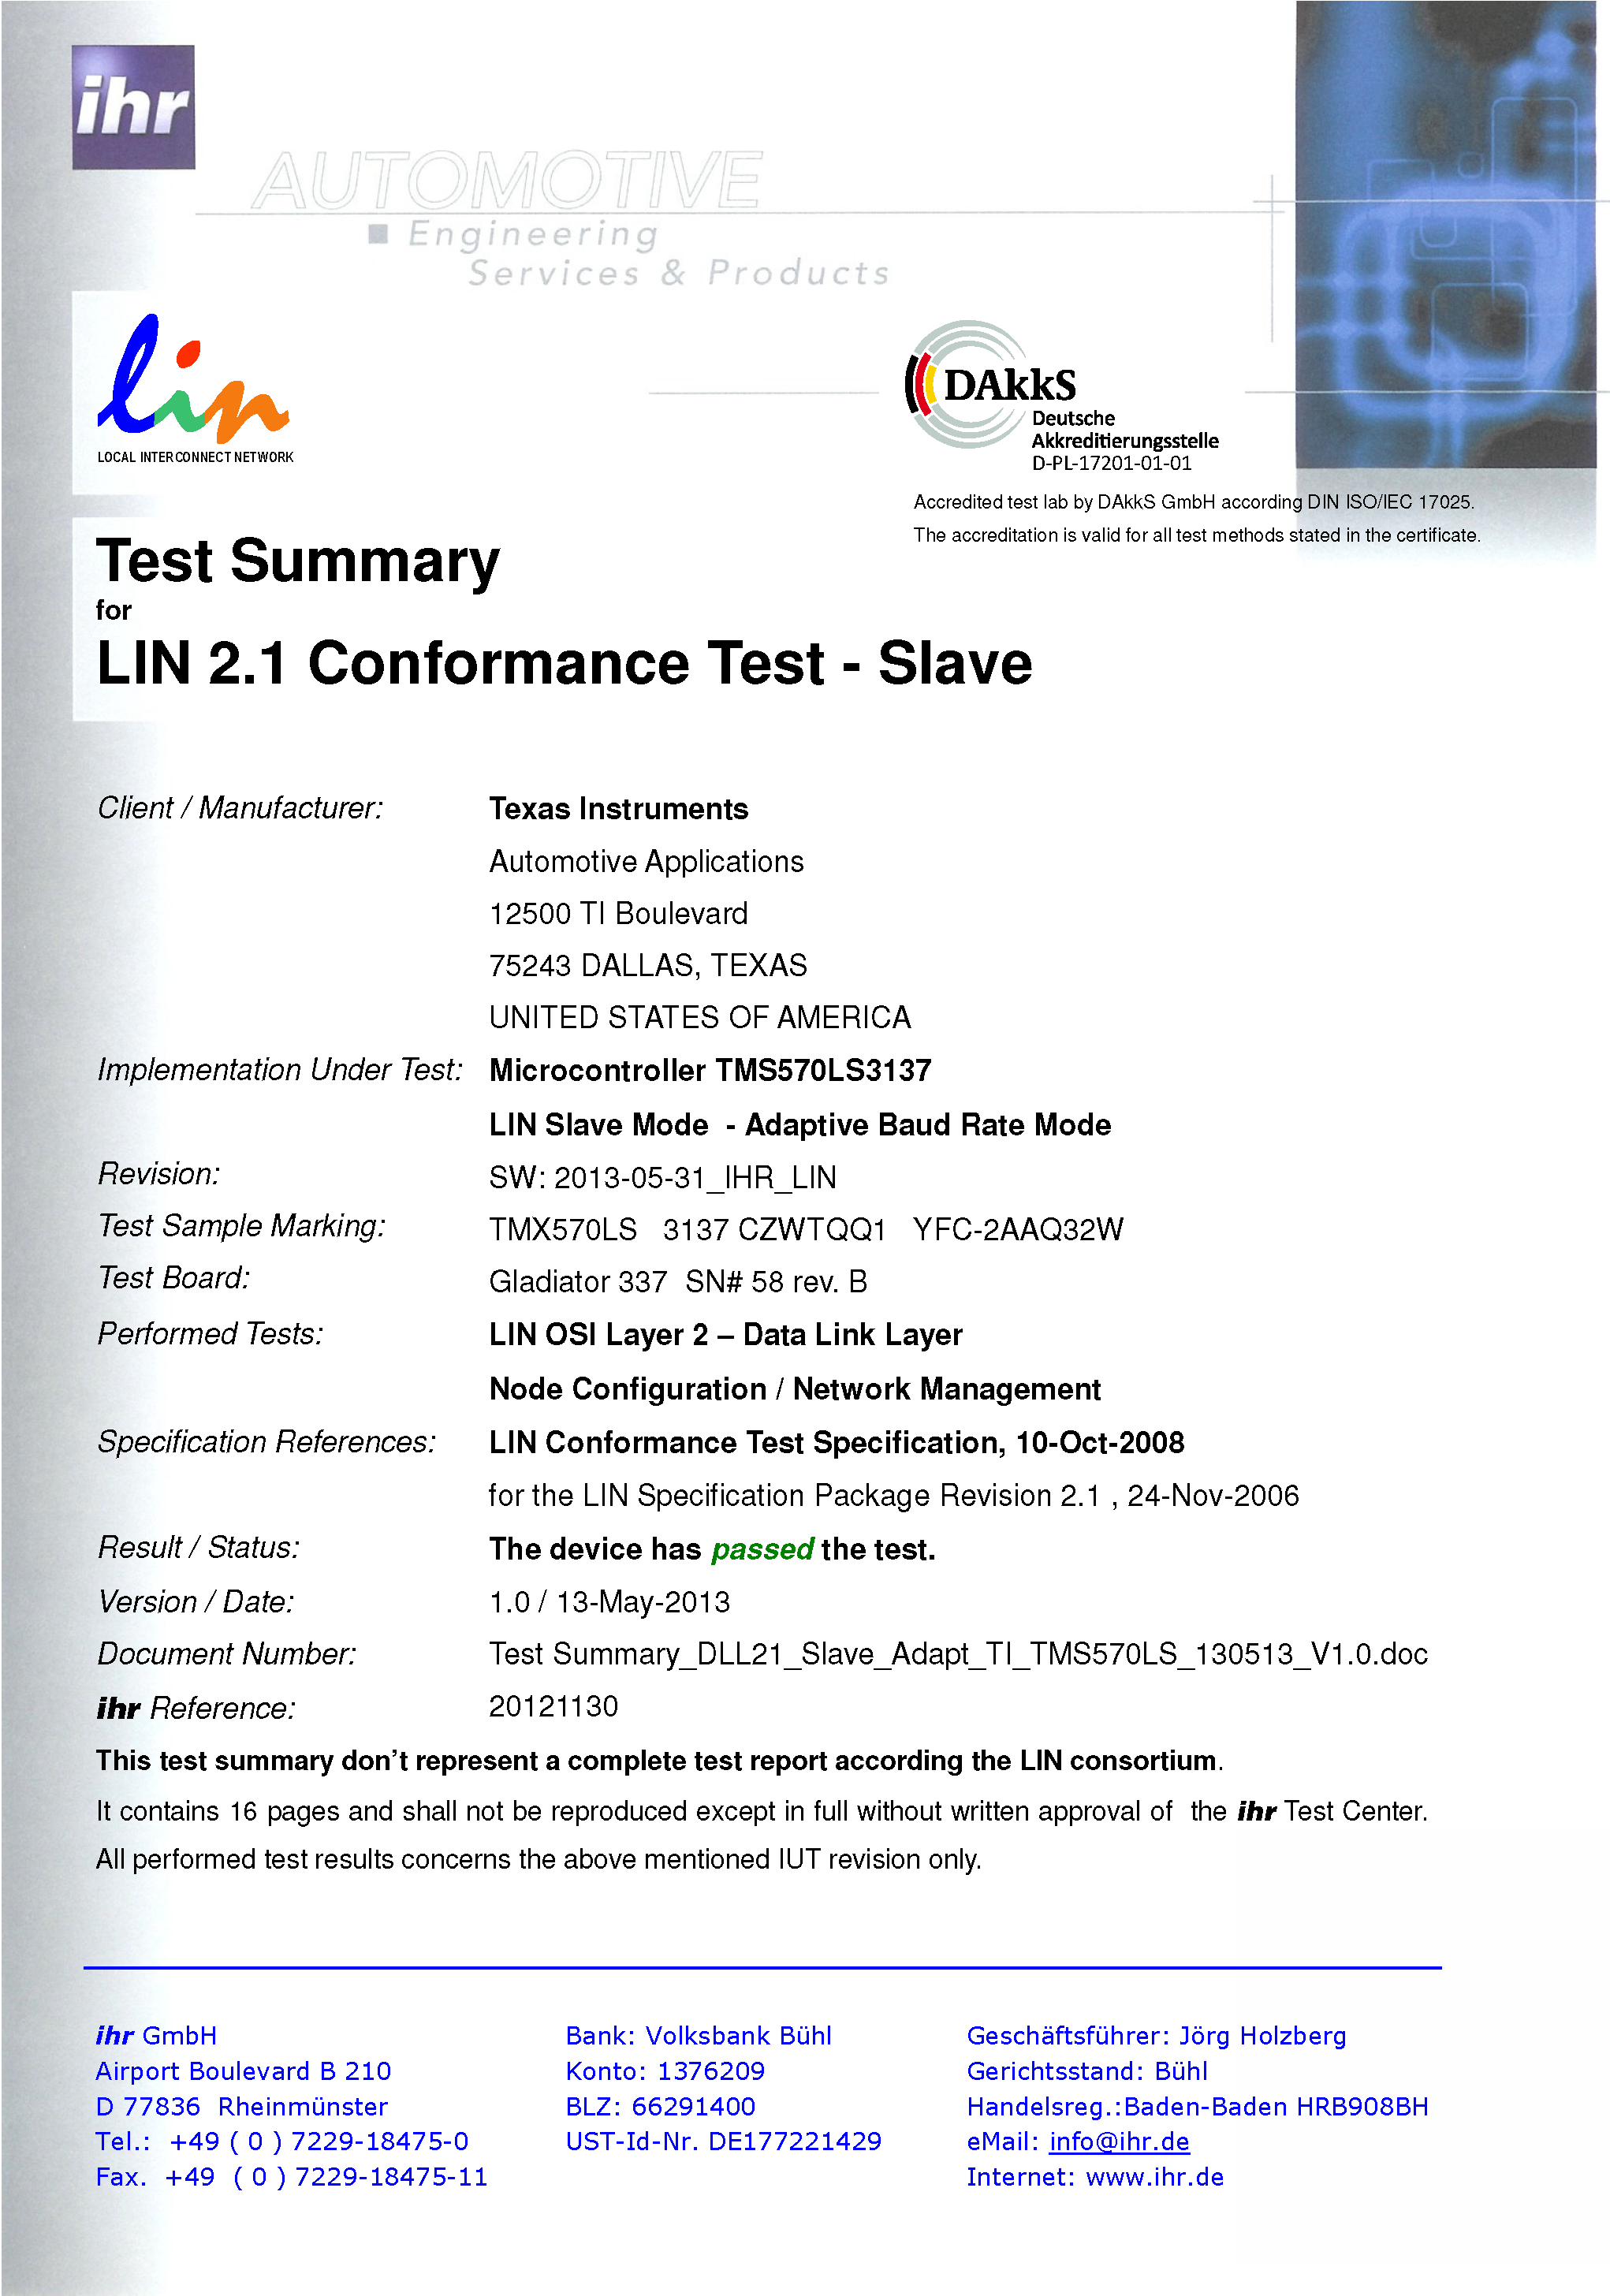 TMS570LS3137 new_LIN_Certification_Slave_Adapt.png